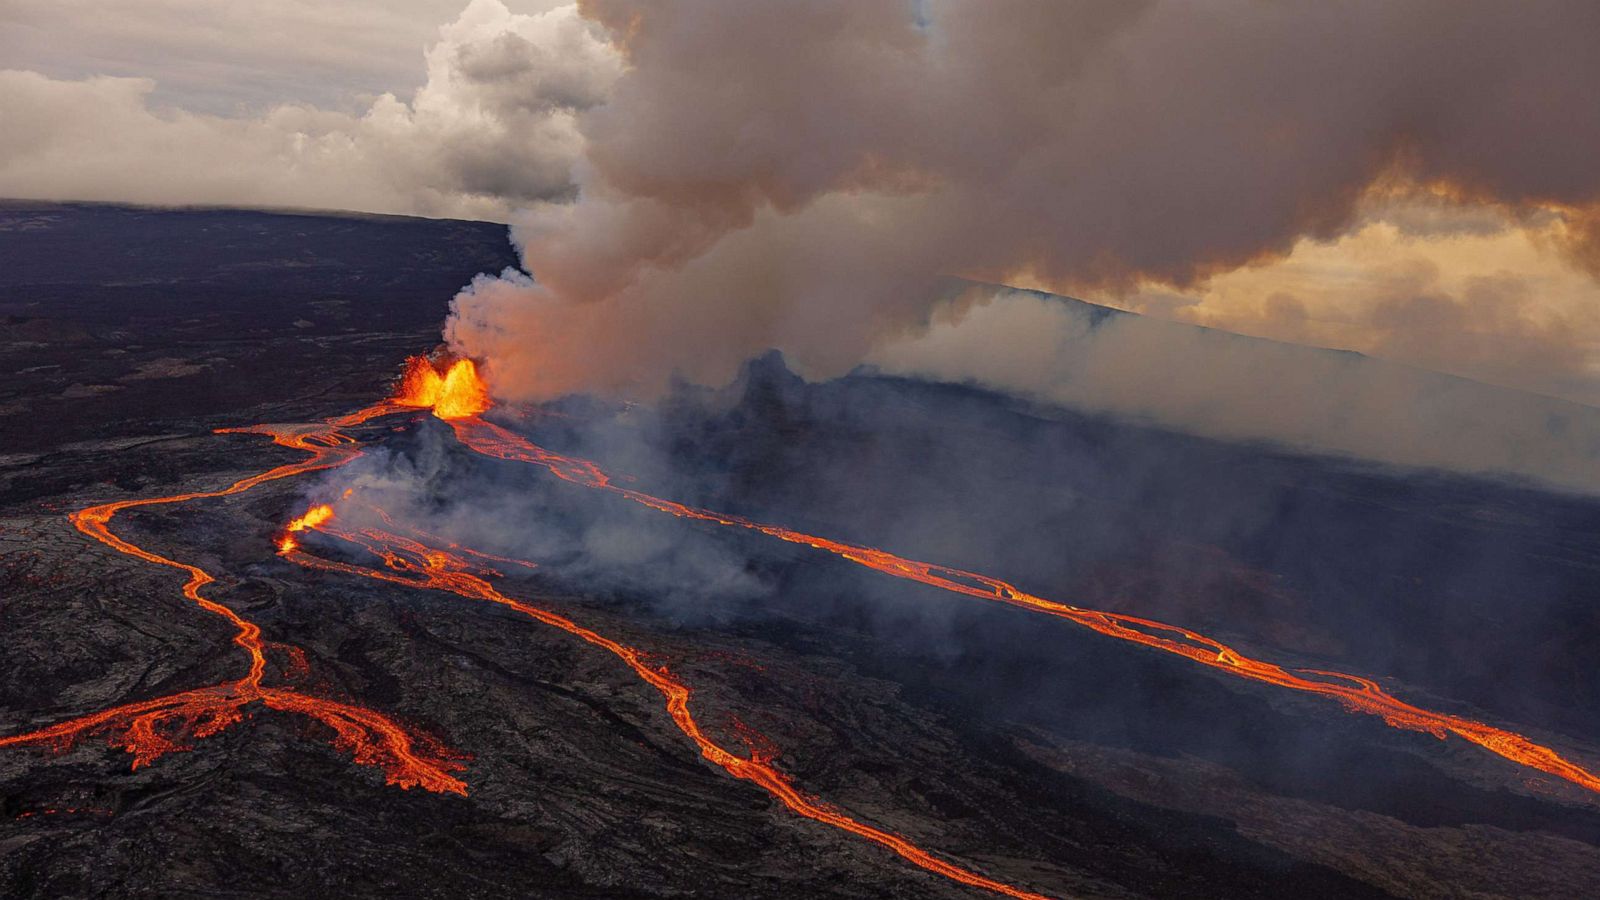 A recent history of volcanic eruptions and their impact, as Mauna Loa erupts - ABC News